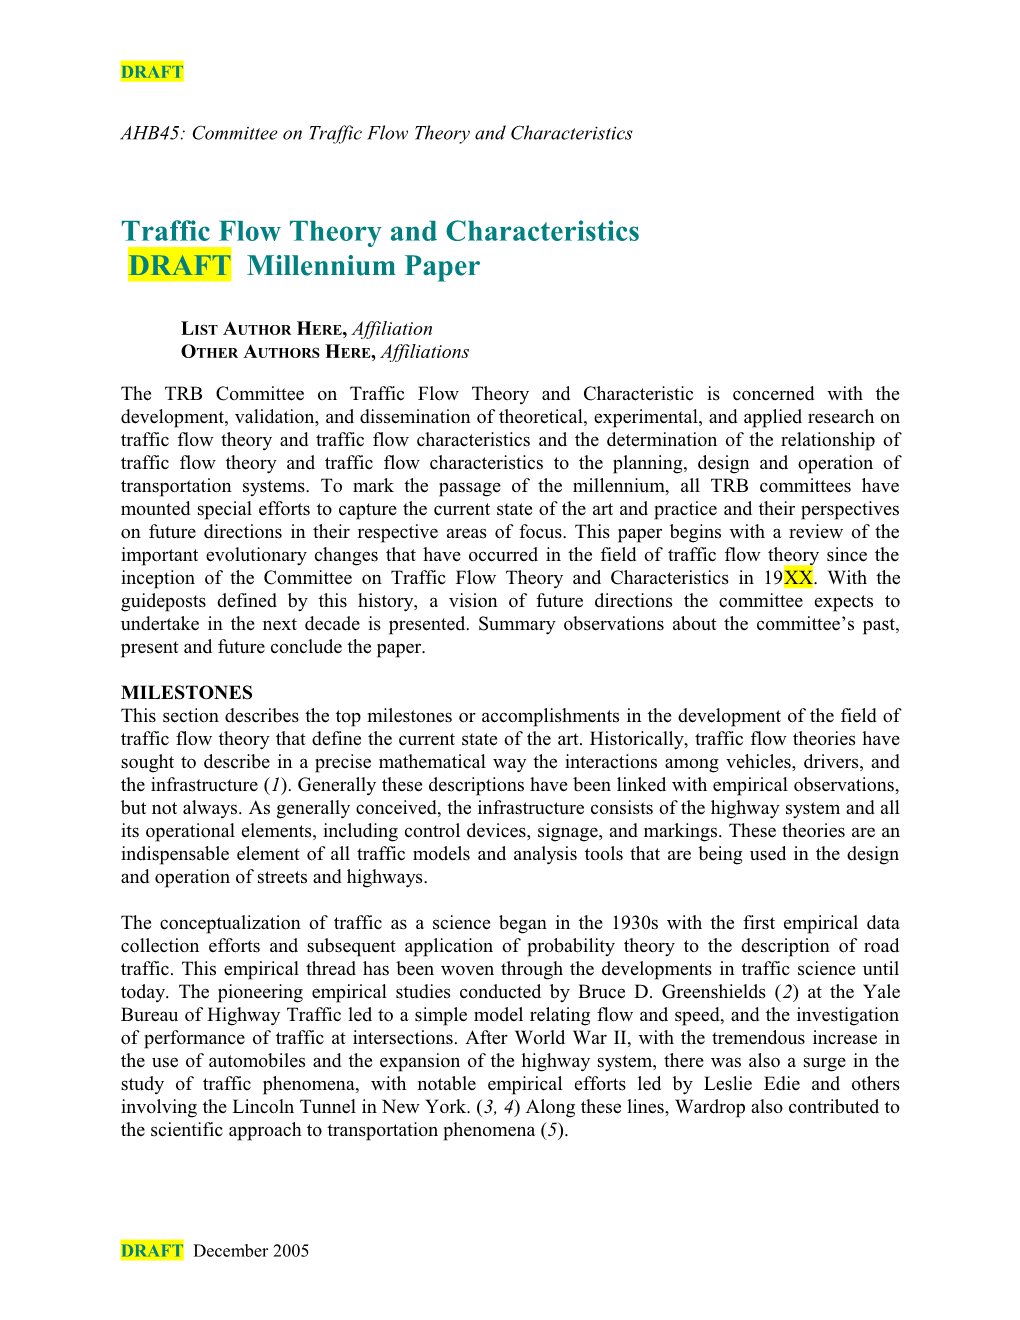 Top Milestones Or Accomplishments in the Development of the Field of Traffic Flow Theory